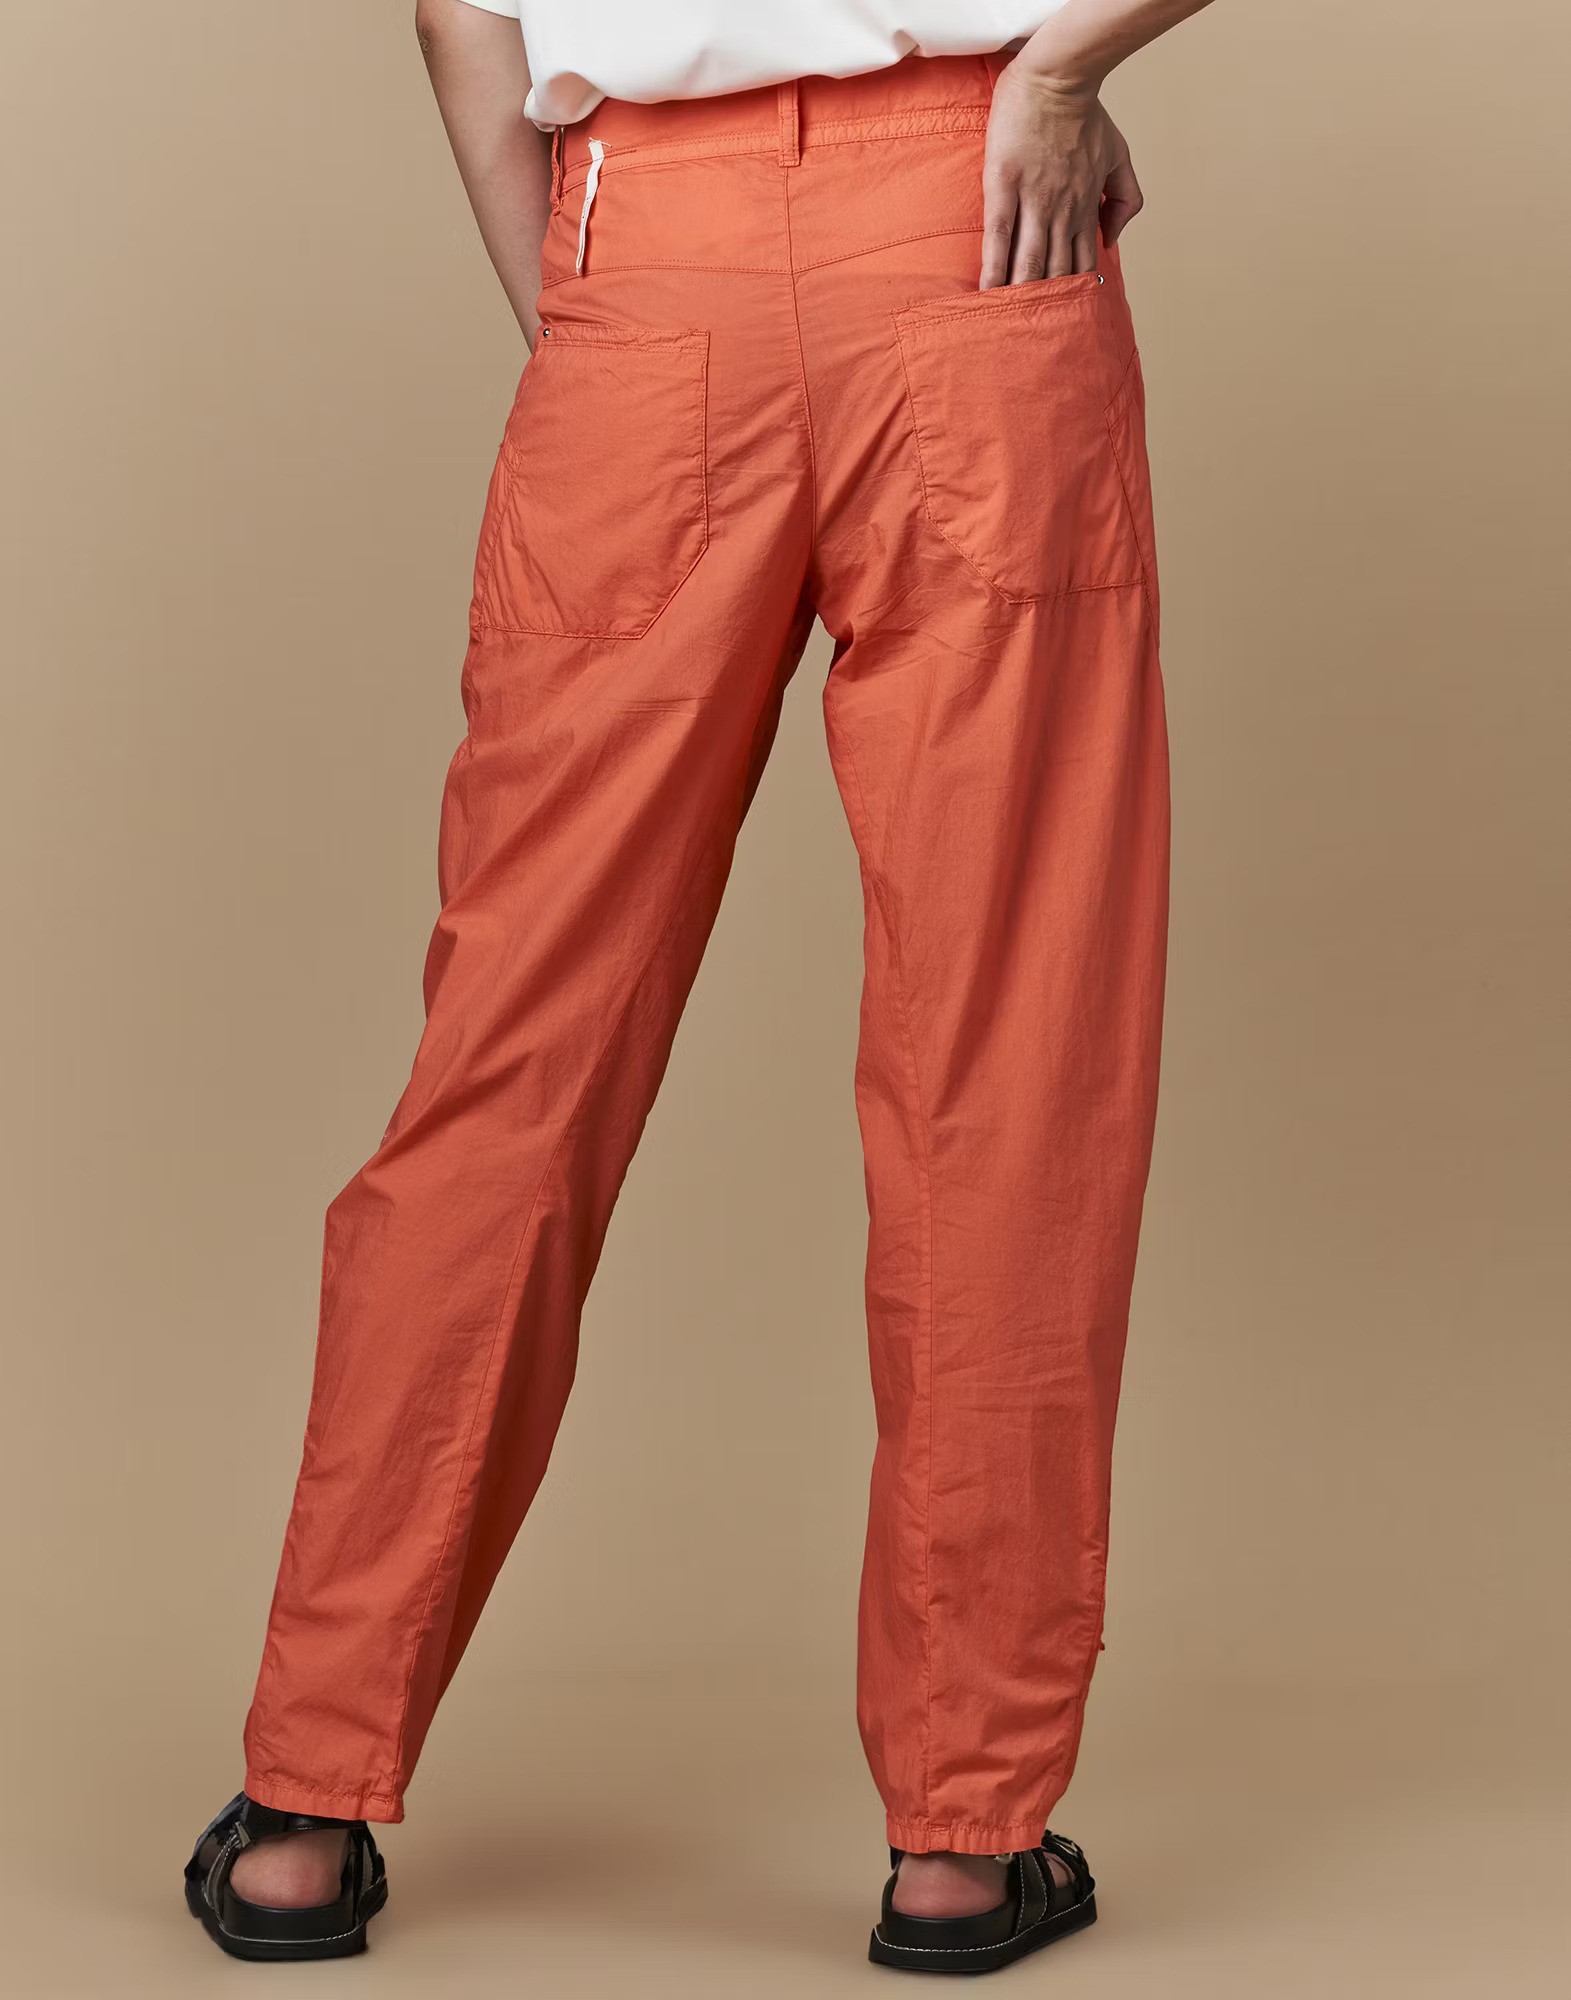 Pants RESOUND 649 | Hot Selection | purchase online